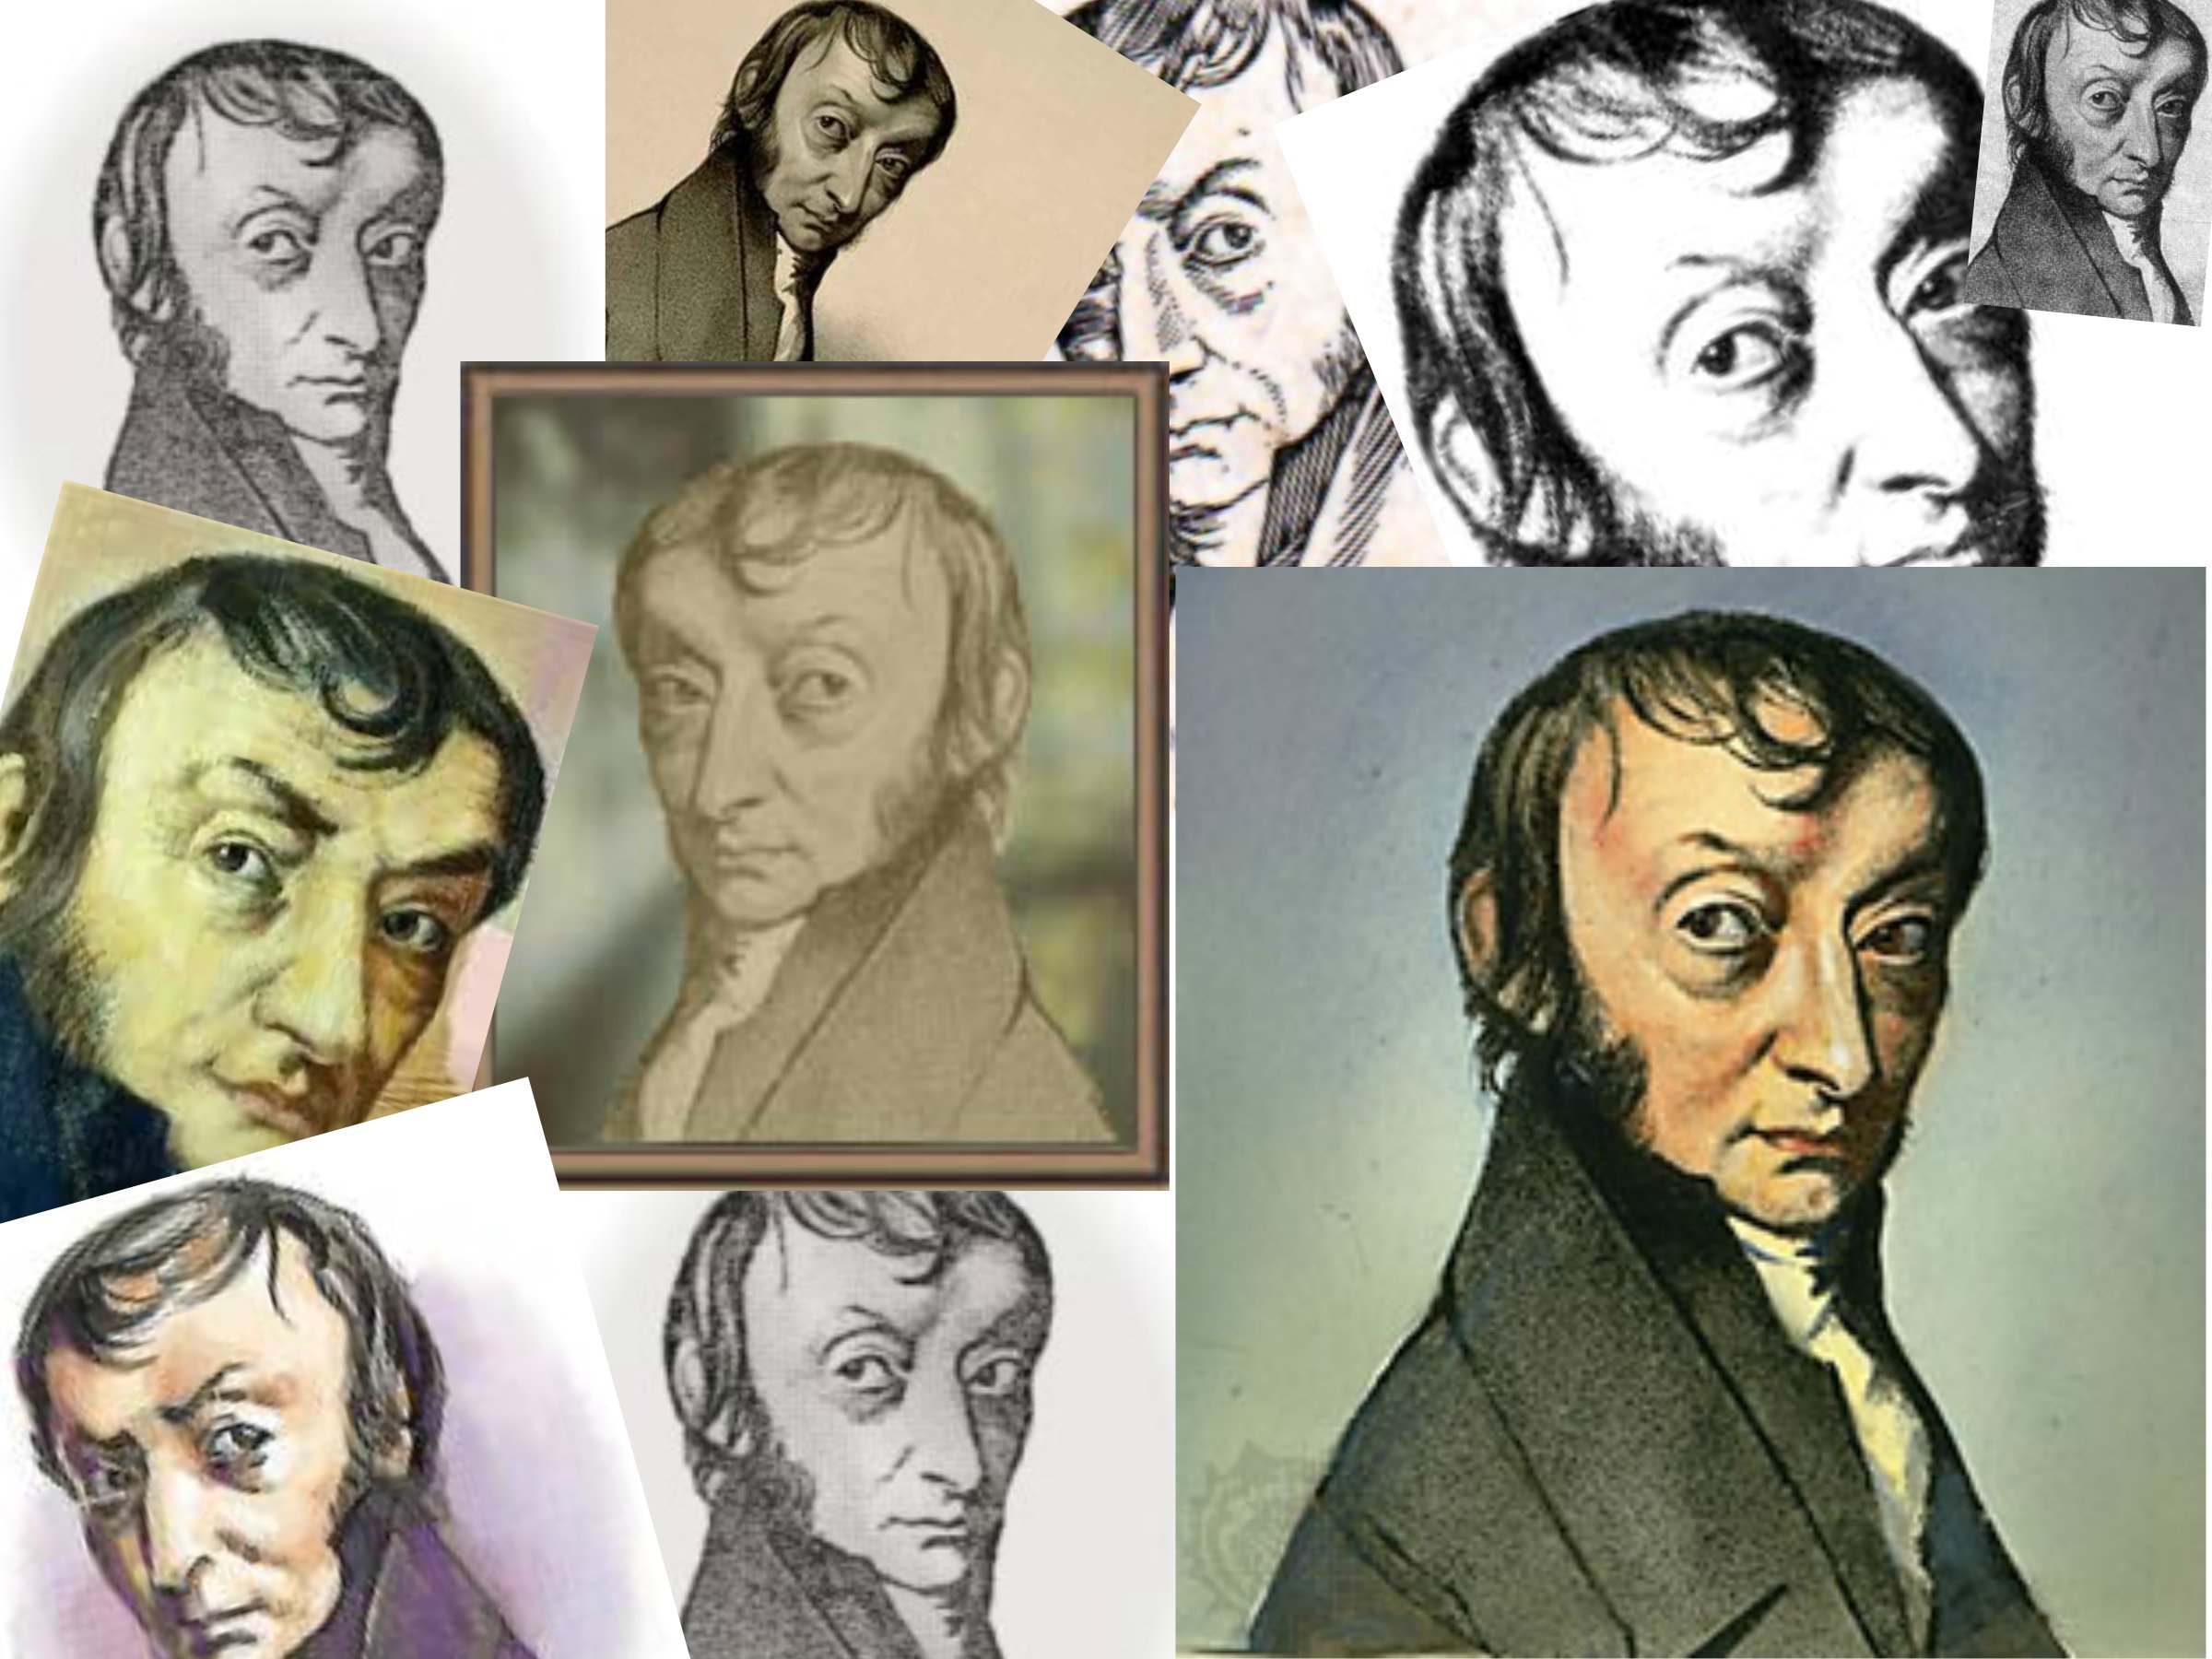 About Amedeo Avogadro